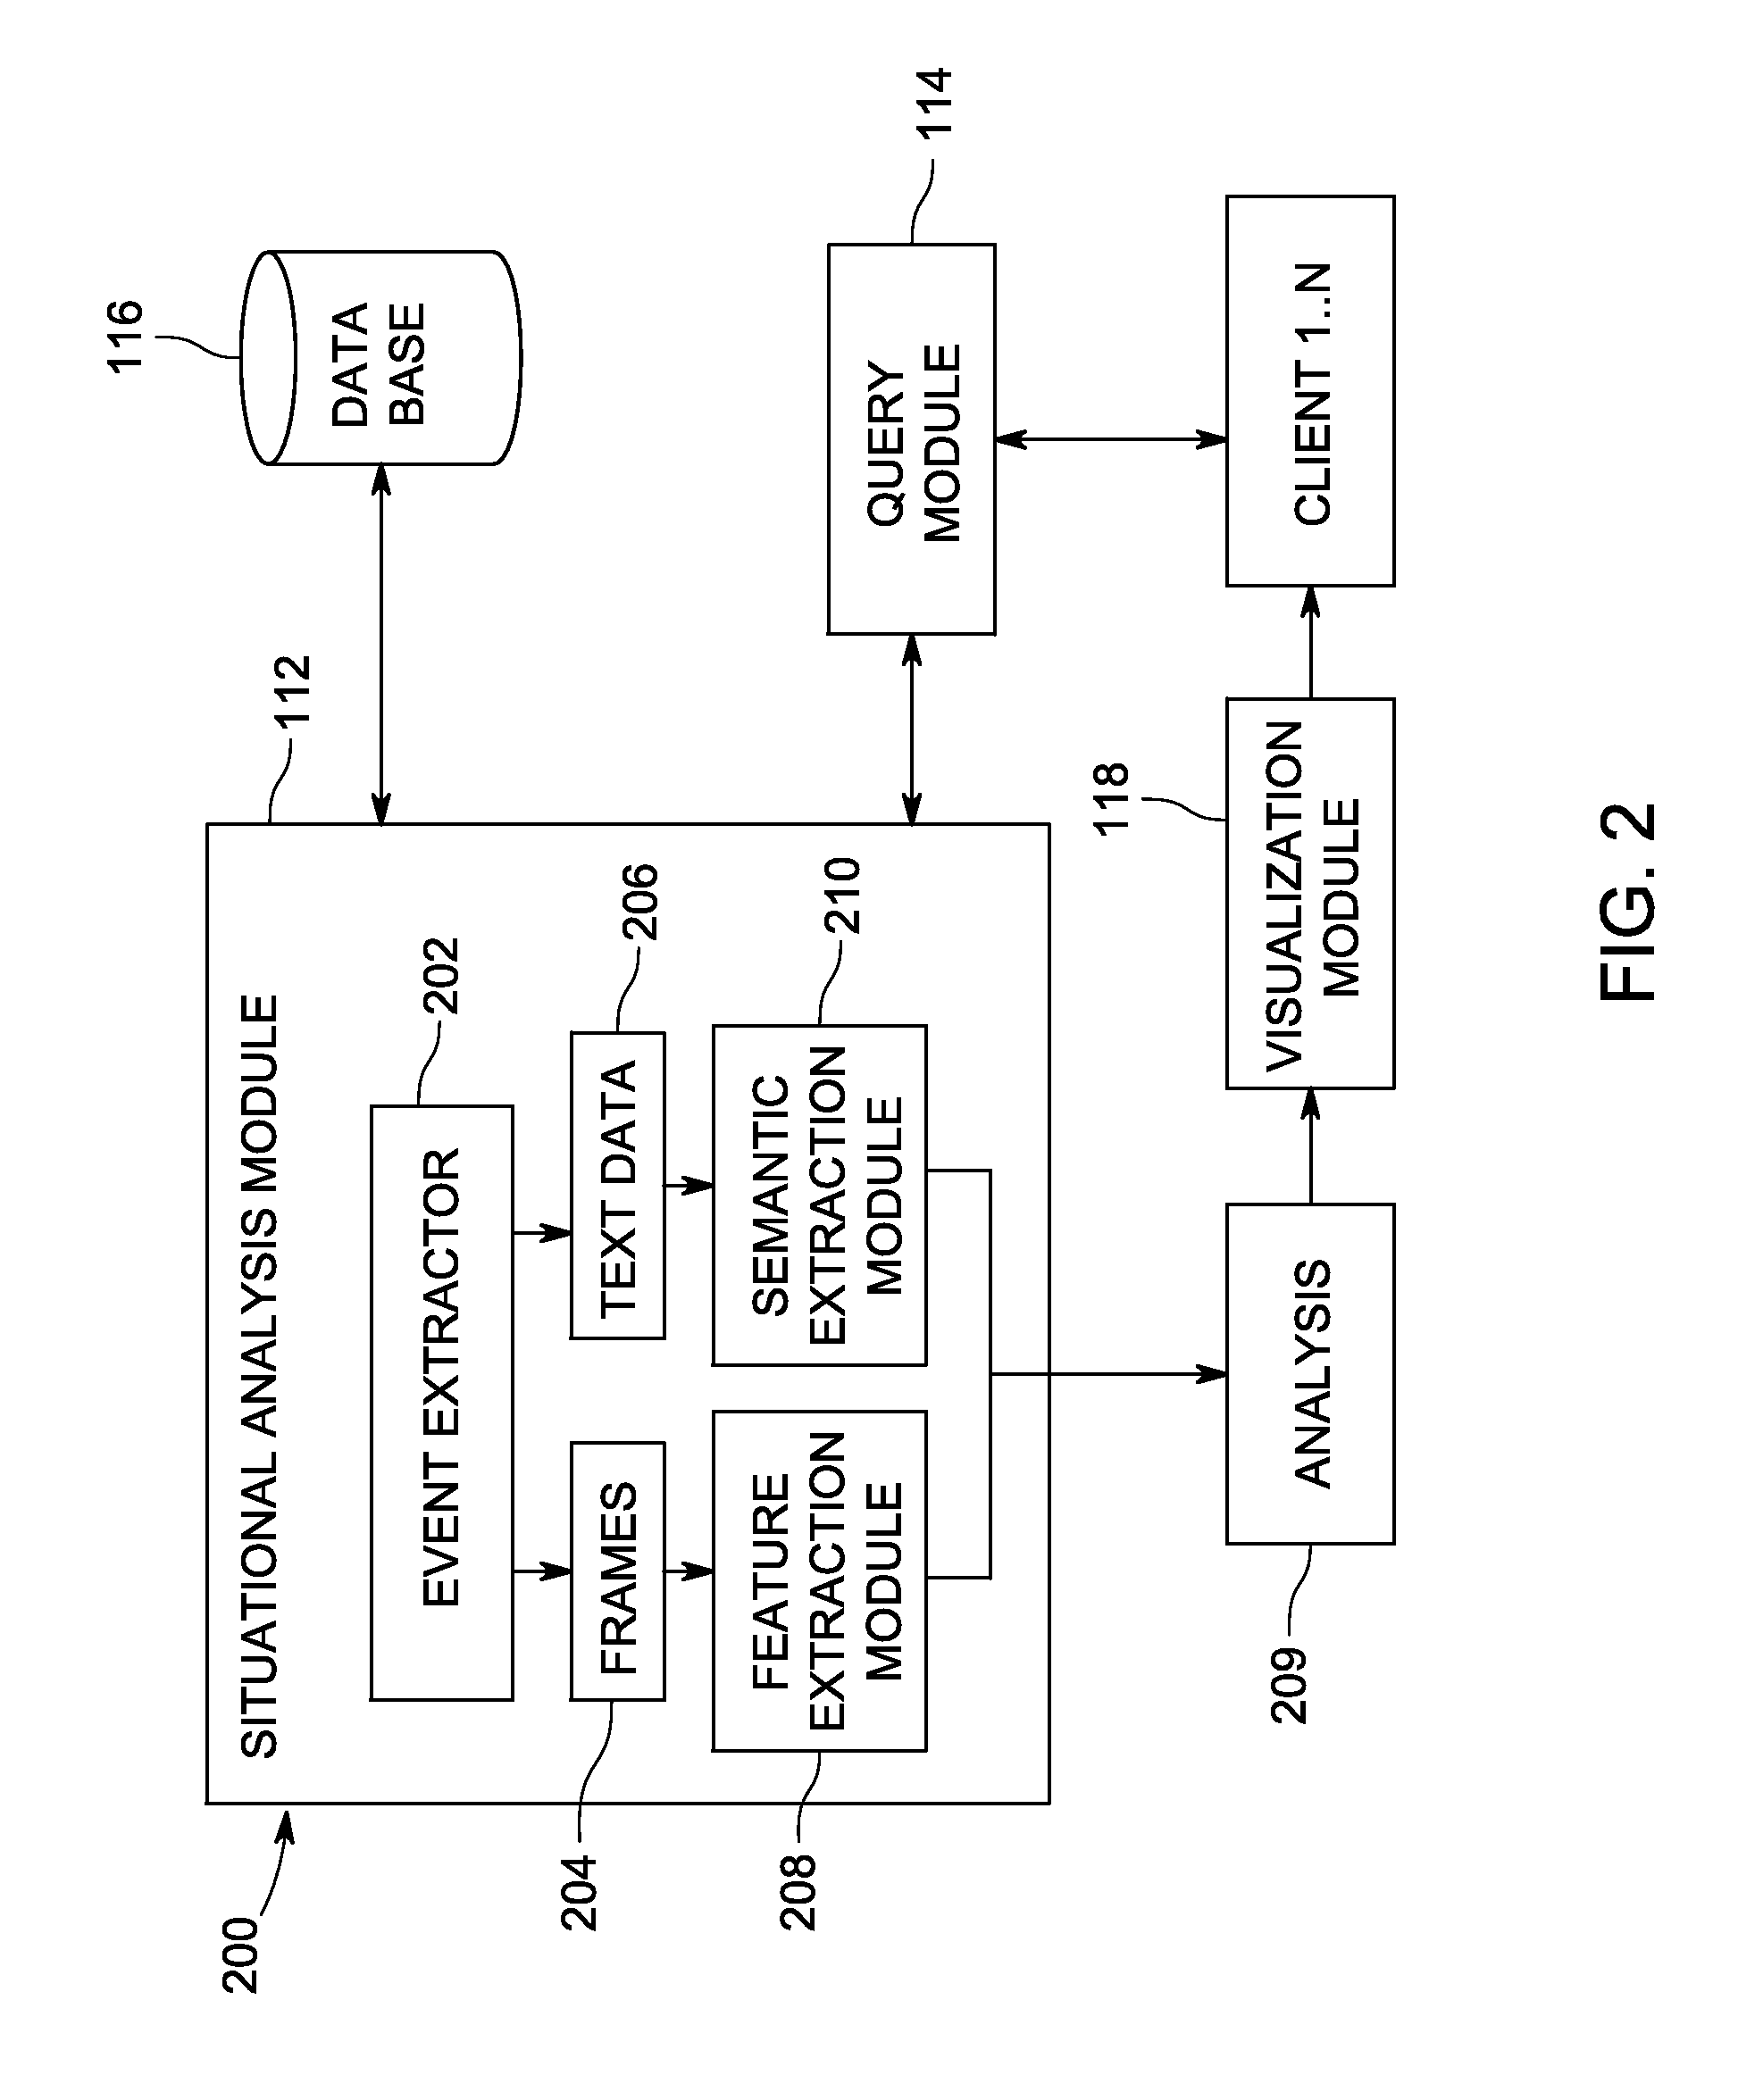 Method and apparatus for correlating and viewing disparate data